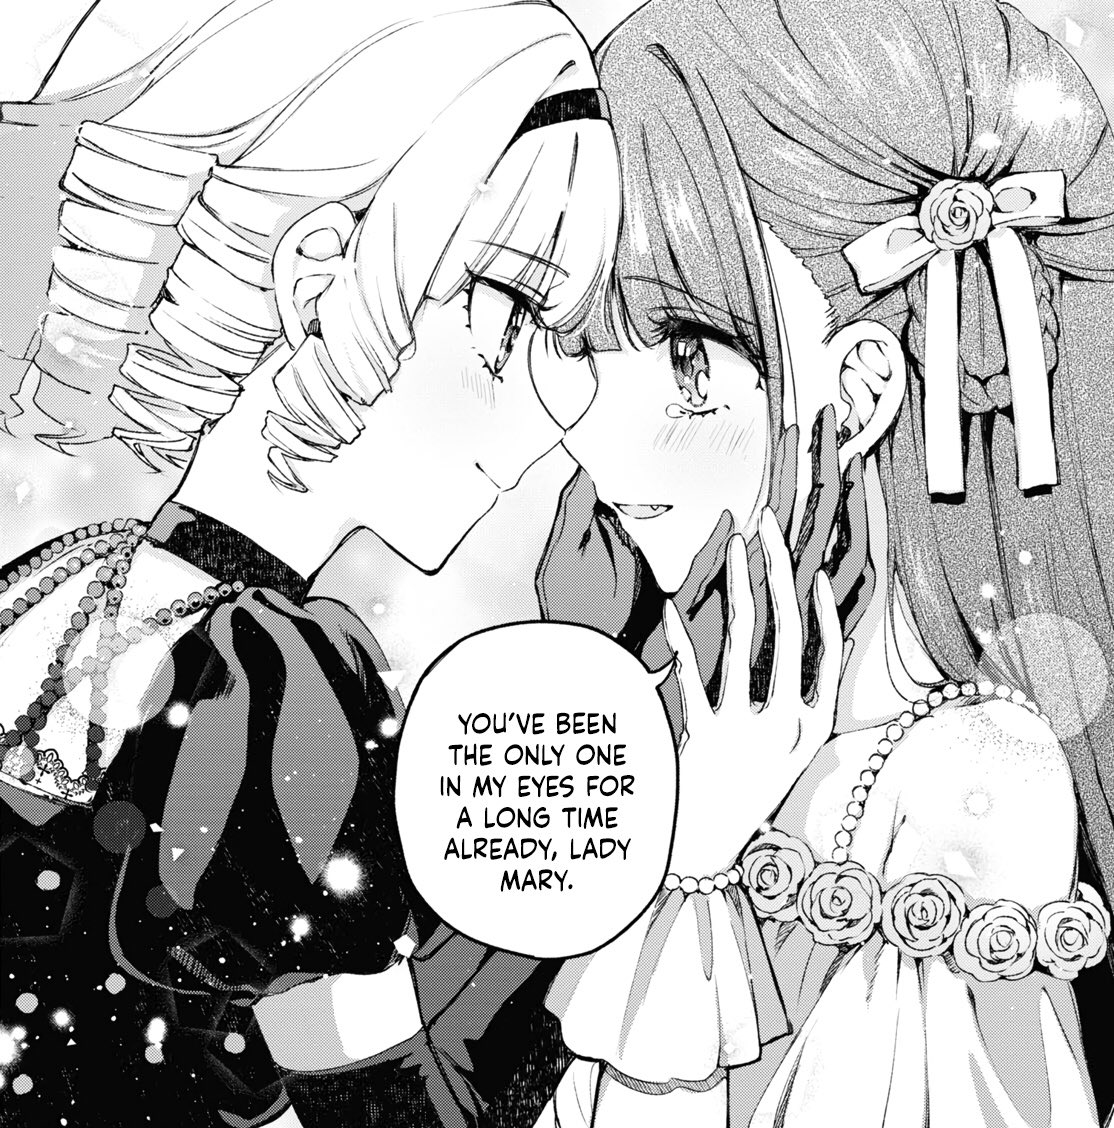 OH JEEZ, NOT ANOTHER VILLAINESS I’M SIMPING OVER???🤪🤪🤪

“If I Could Take the Villainess’ Hand Tonight” is another hidden gem of a yuri manga that you should all check out, your queen Lady Mary commands you!!!👸🫵🙇‍♀️